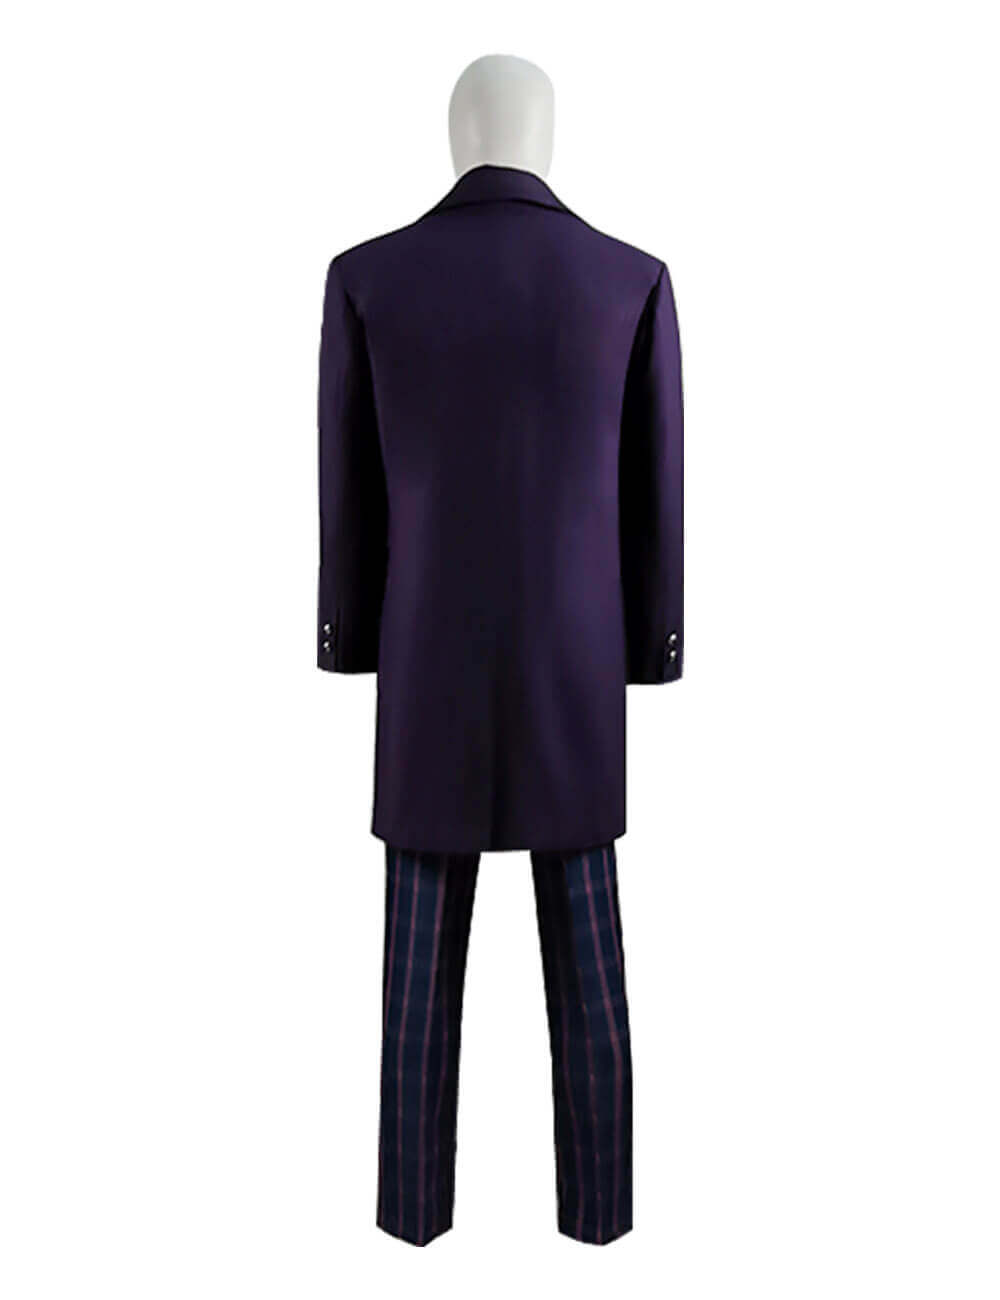 Doctor Who Series 12 The Master Coat Sacha Dhawan Purple Outfit Suit - ACcosplay